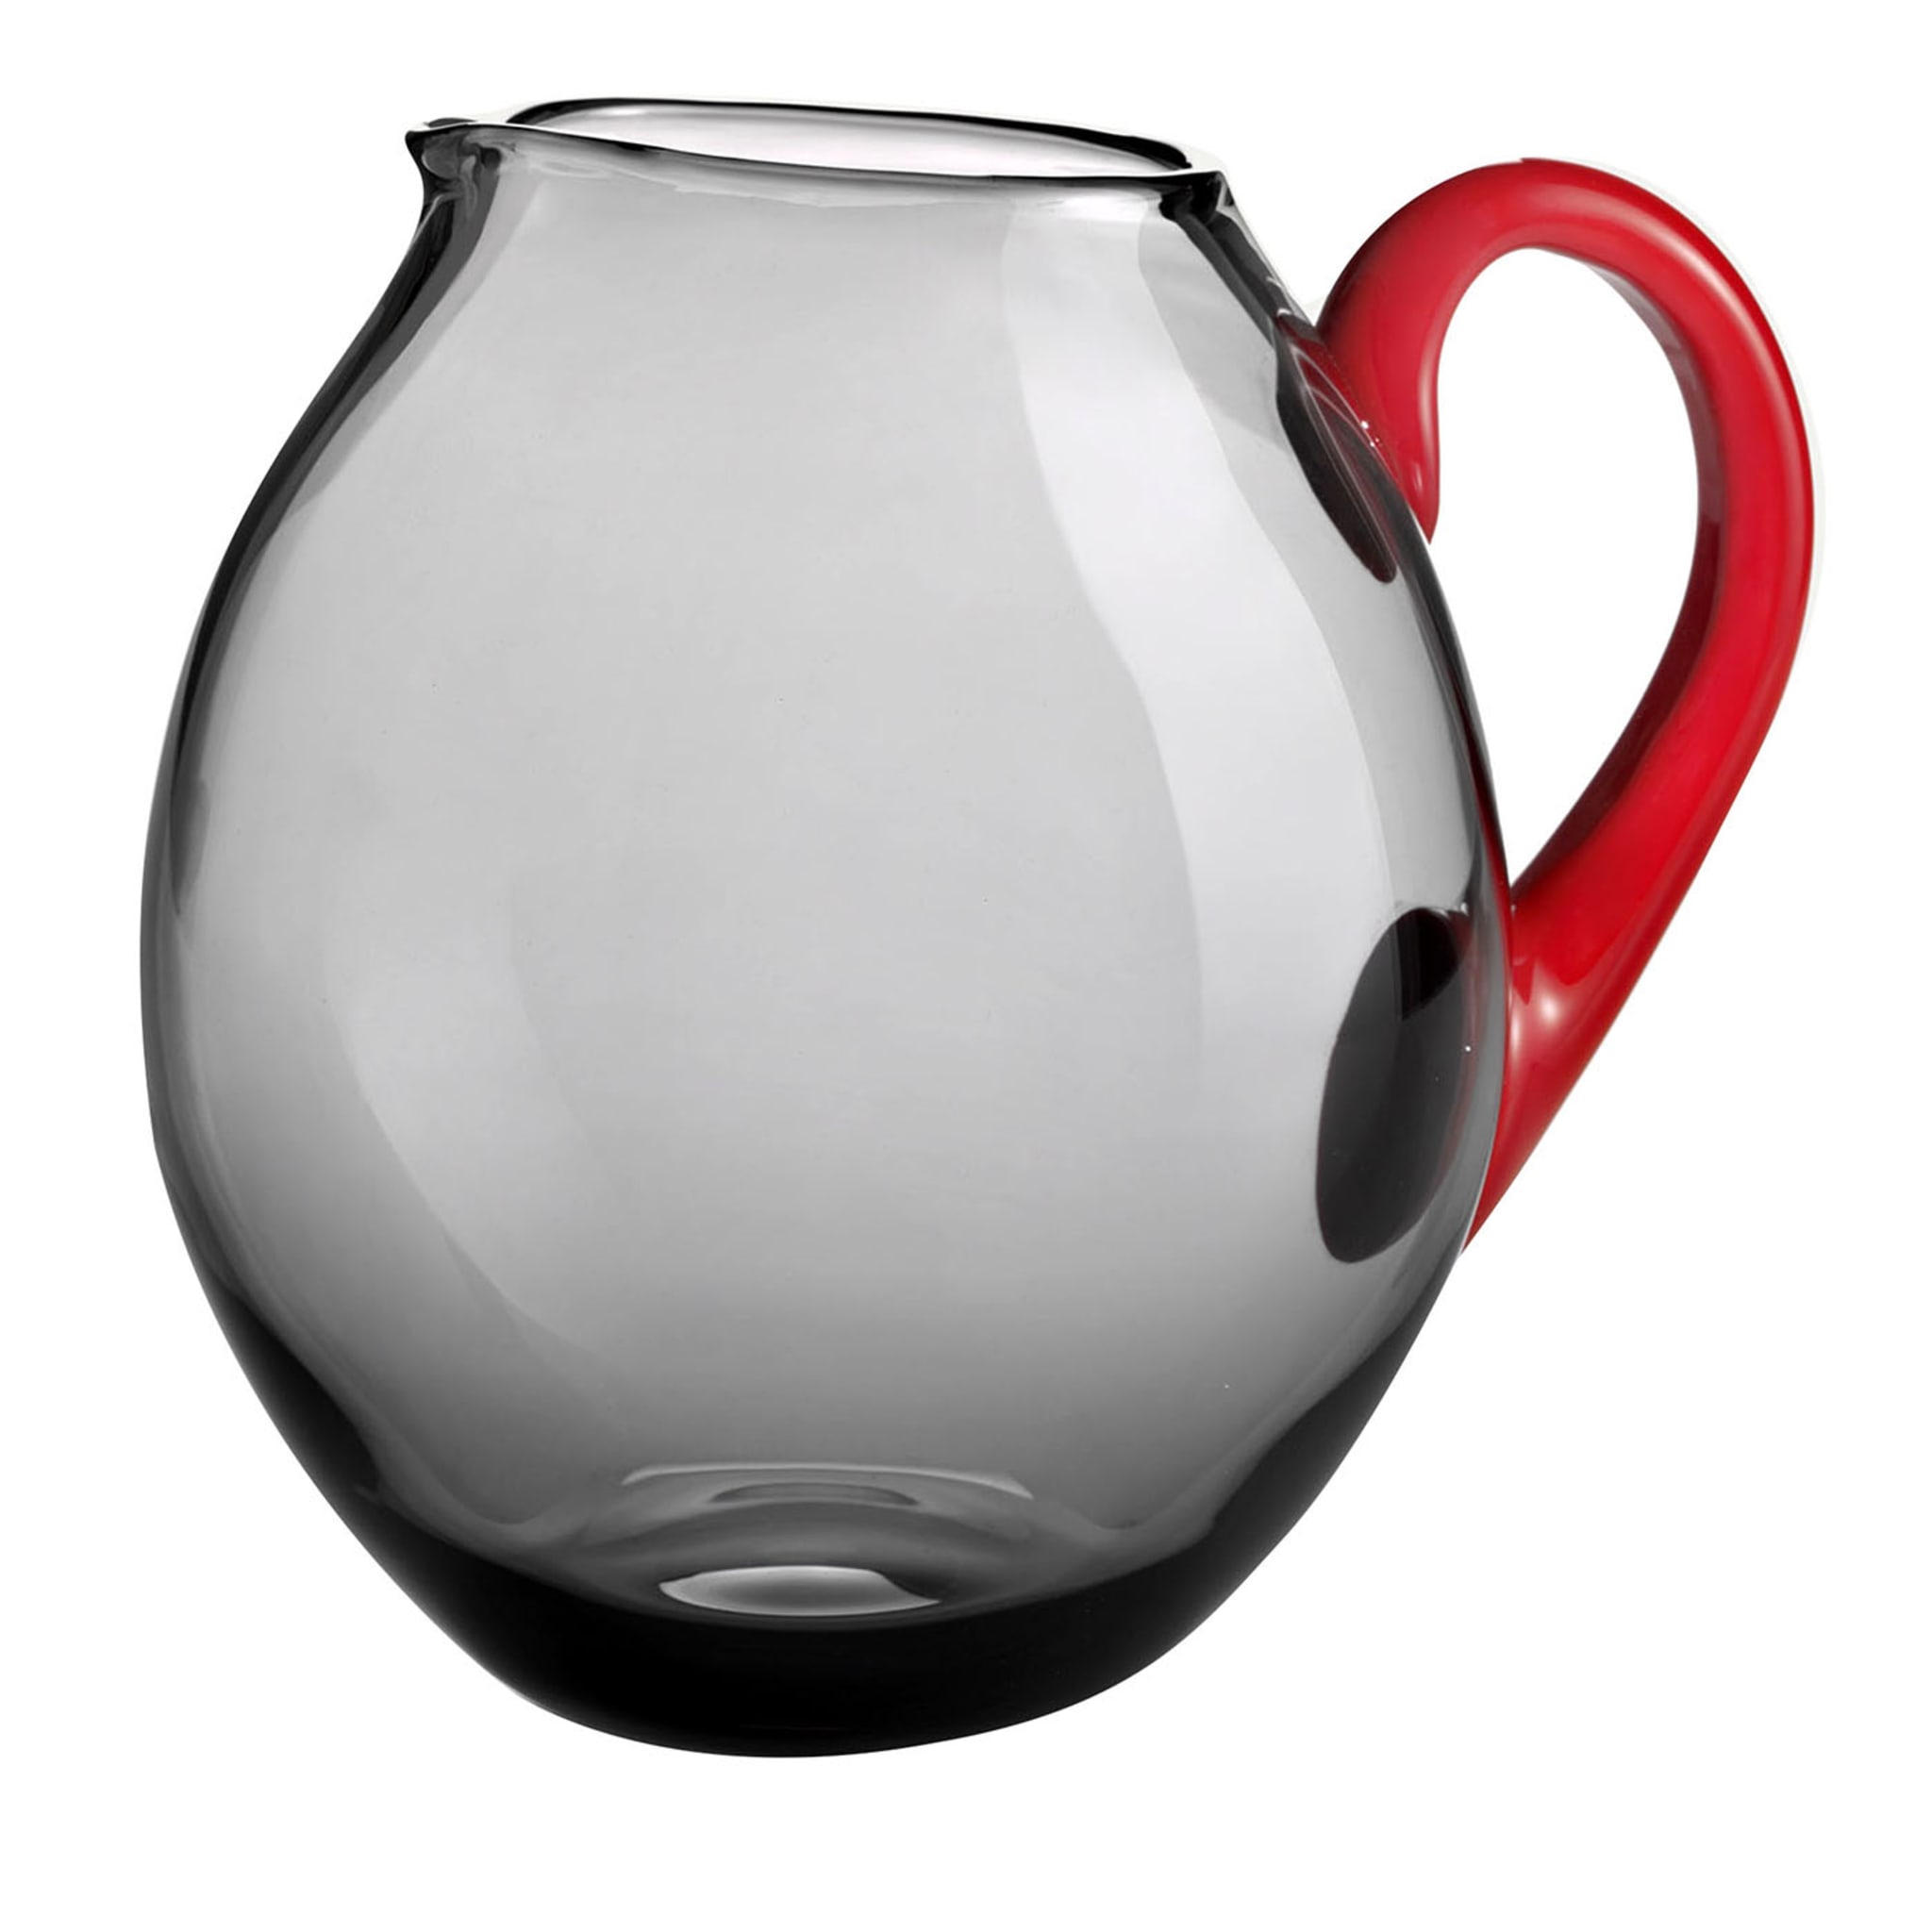 Dandy Gray & Coral Pitcher by Stefano Marcato - Main view